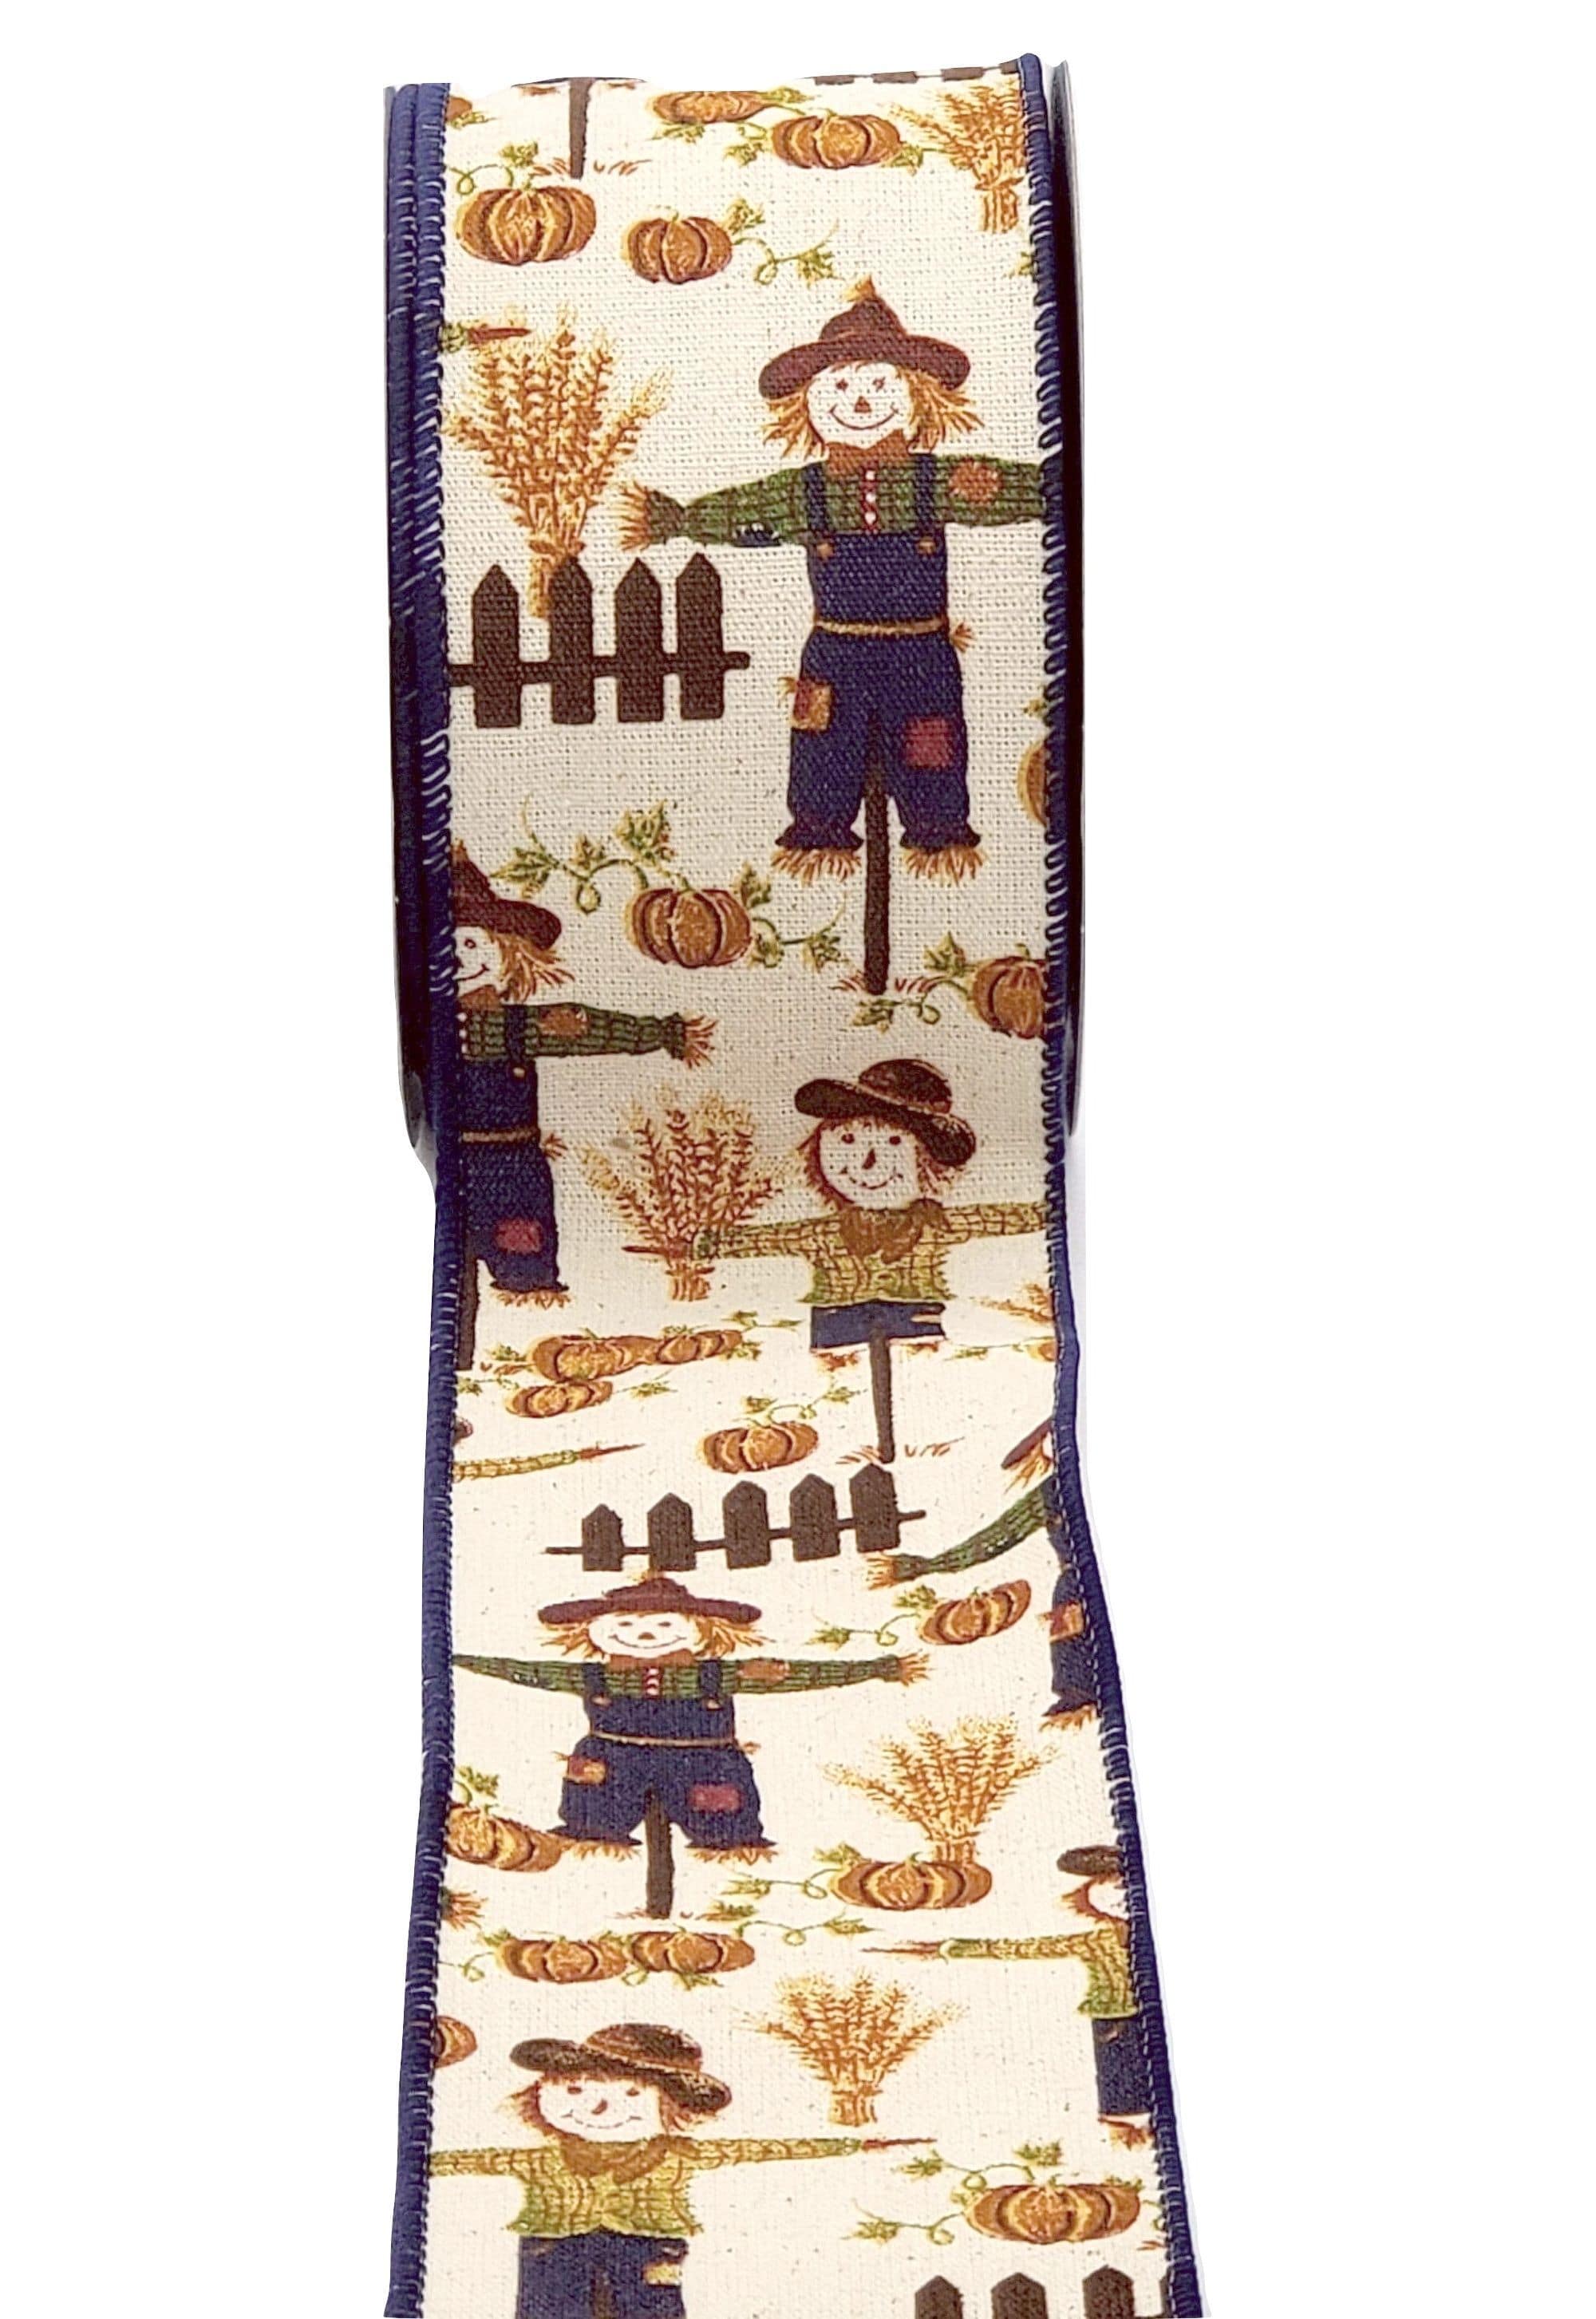 Wired Fall/Autumn Ribbon - 2.5" Cream Canvas Ribbon with Scarecrows in Blue & Orange Overalls - 10 Yards